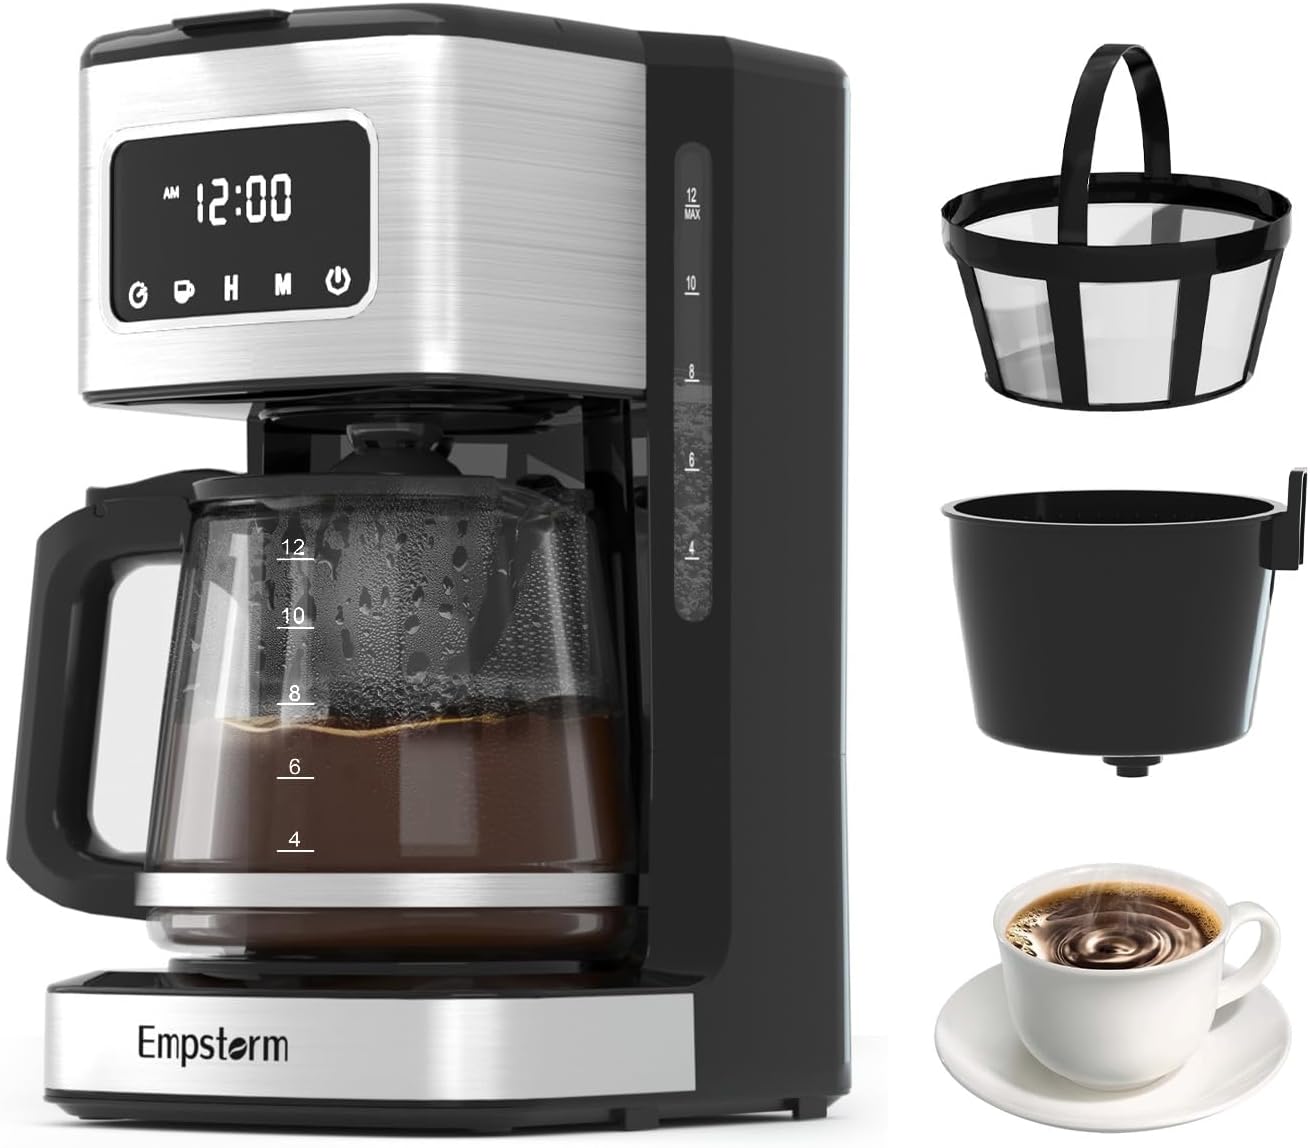 Empstorm 12 Cup Programmable Drip Coffee Maker - 1000W Fast Brew Coffee Machine with Glass Carafe, Auto Shut Off  4-Hour Keep Warm, Anti-Drip System, Strong Brew, Black with Stainless Steel Accents